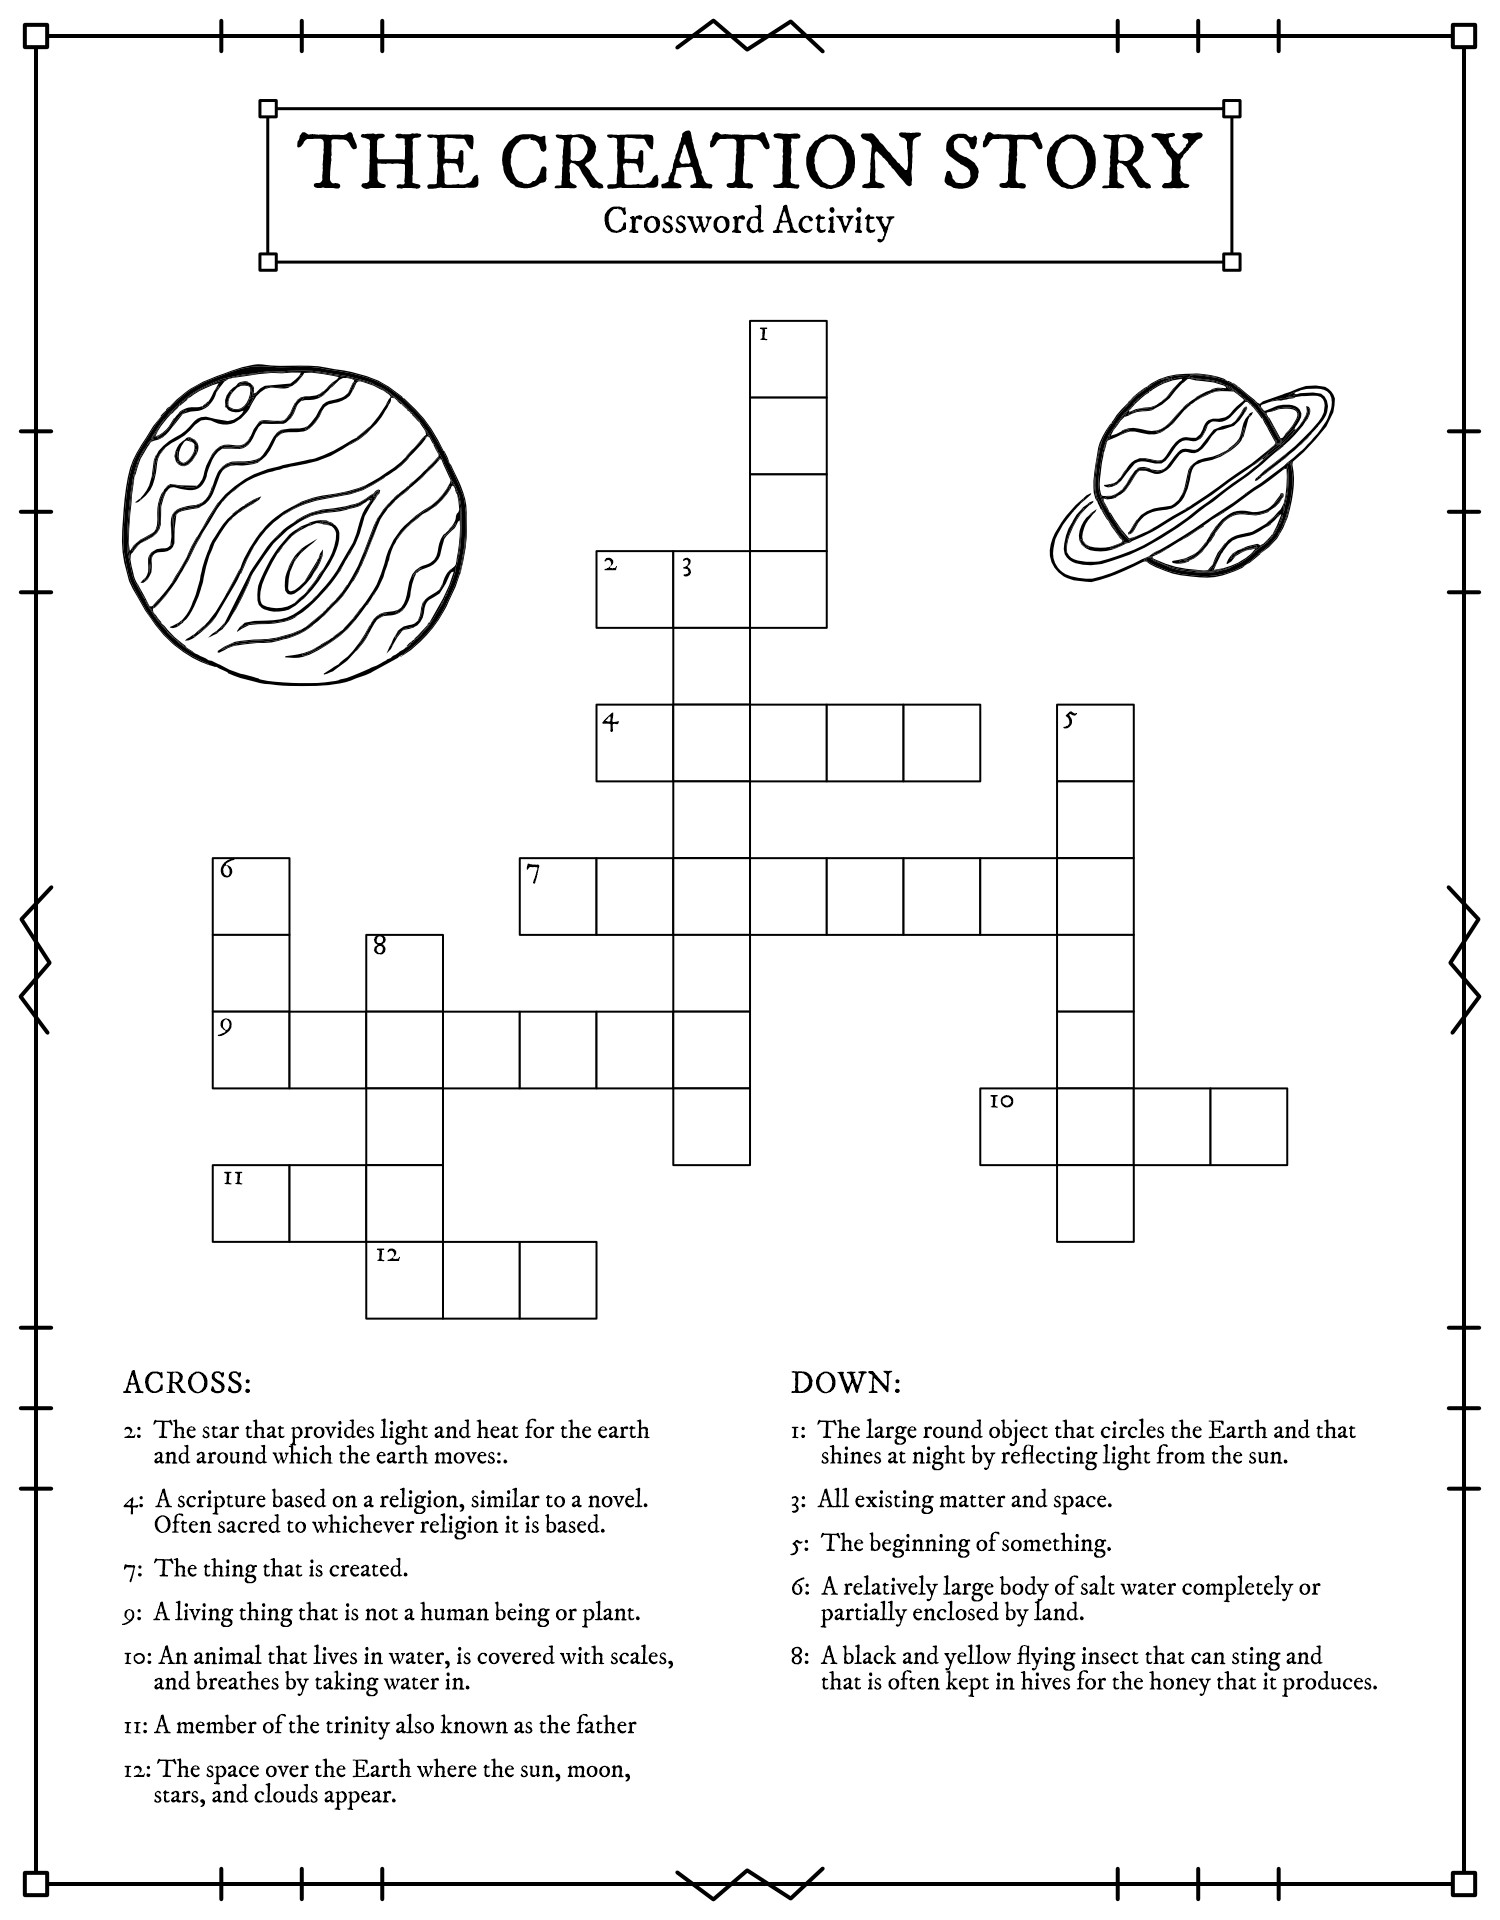 Simple Crossword Activity Sheets About The Creation Story Printable